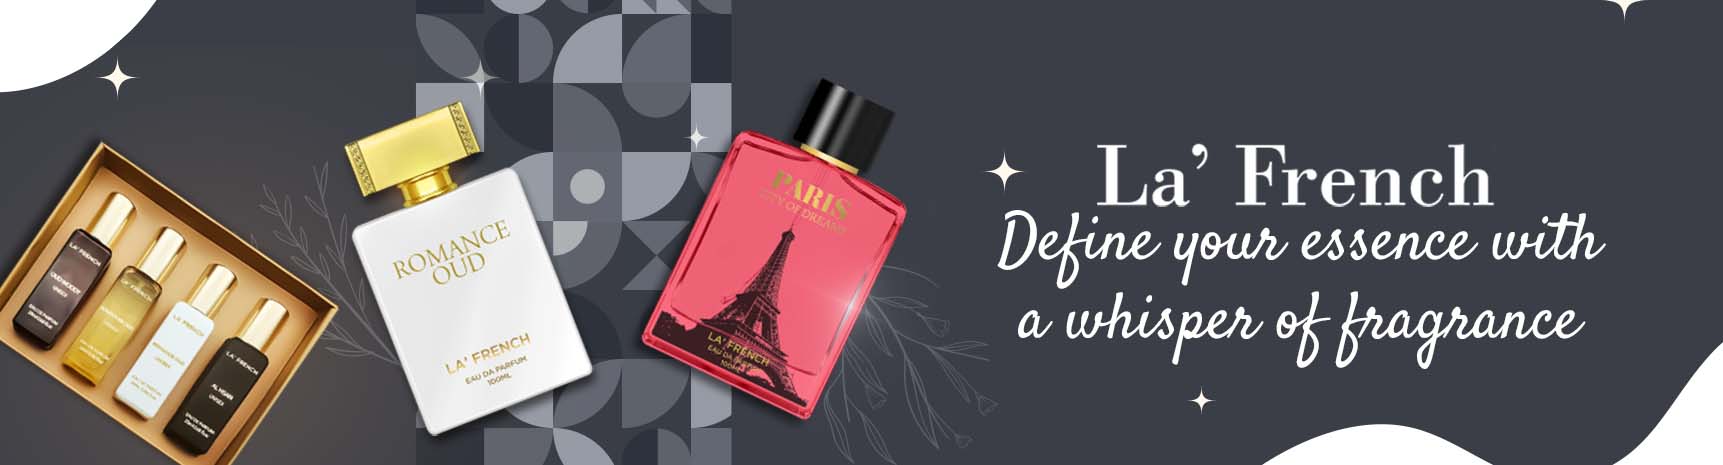 Lafrench - Classic Perfumes : Get Upto 85% OFF